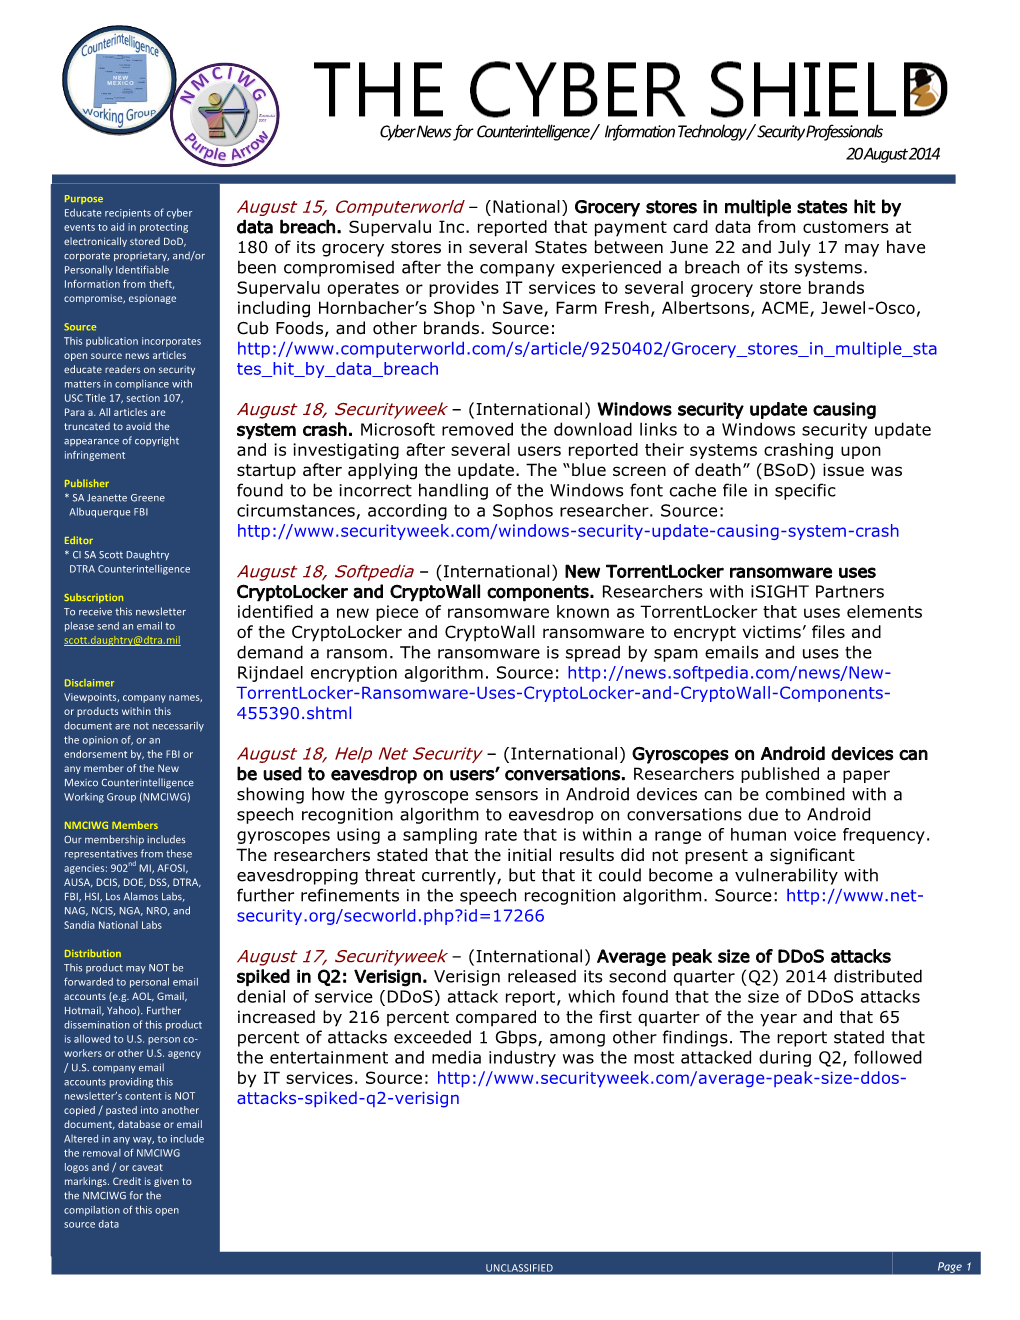 Cyber News for Counterintelligence / Information Technology / Security Professionals 20 August 2014